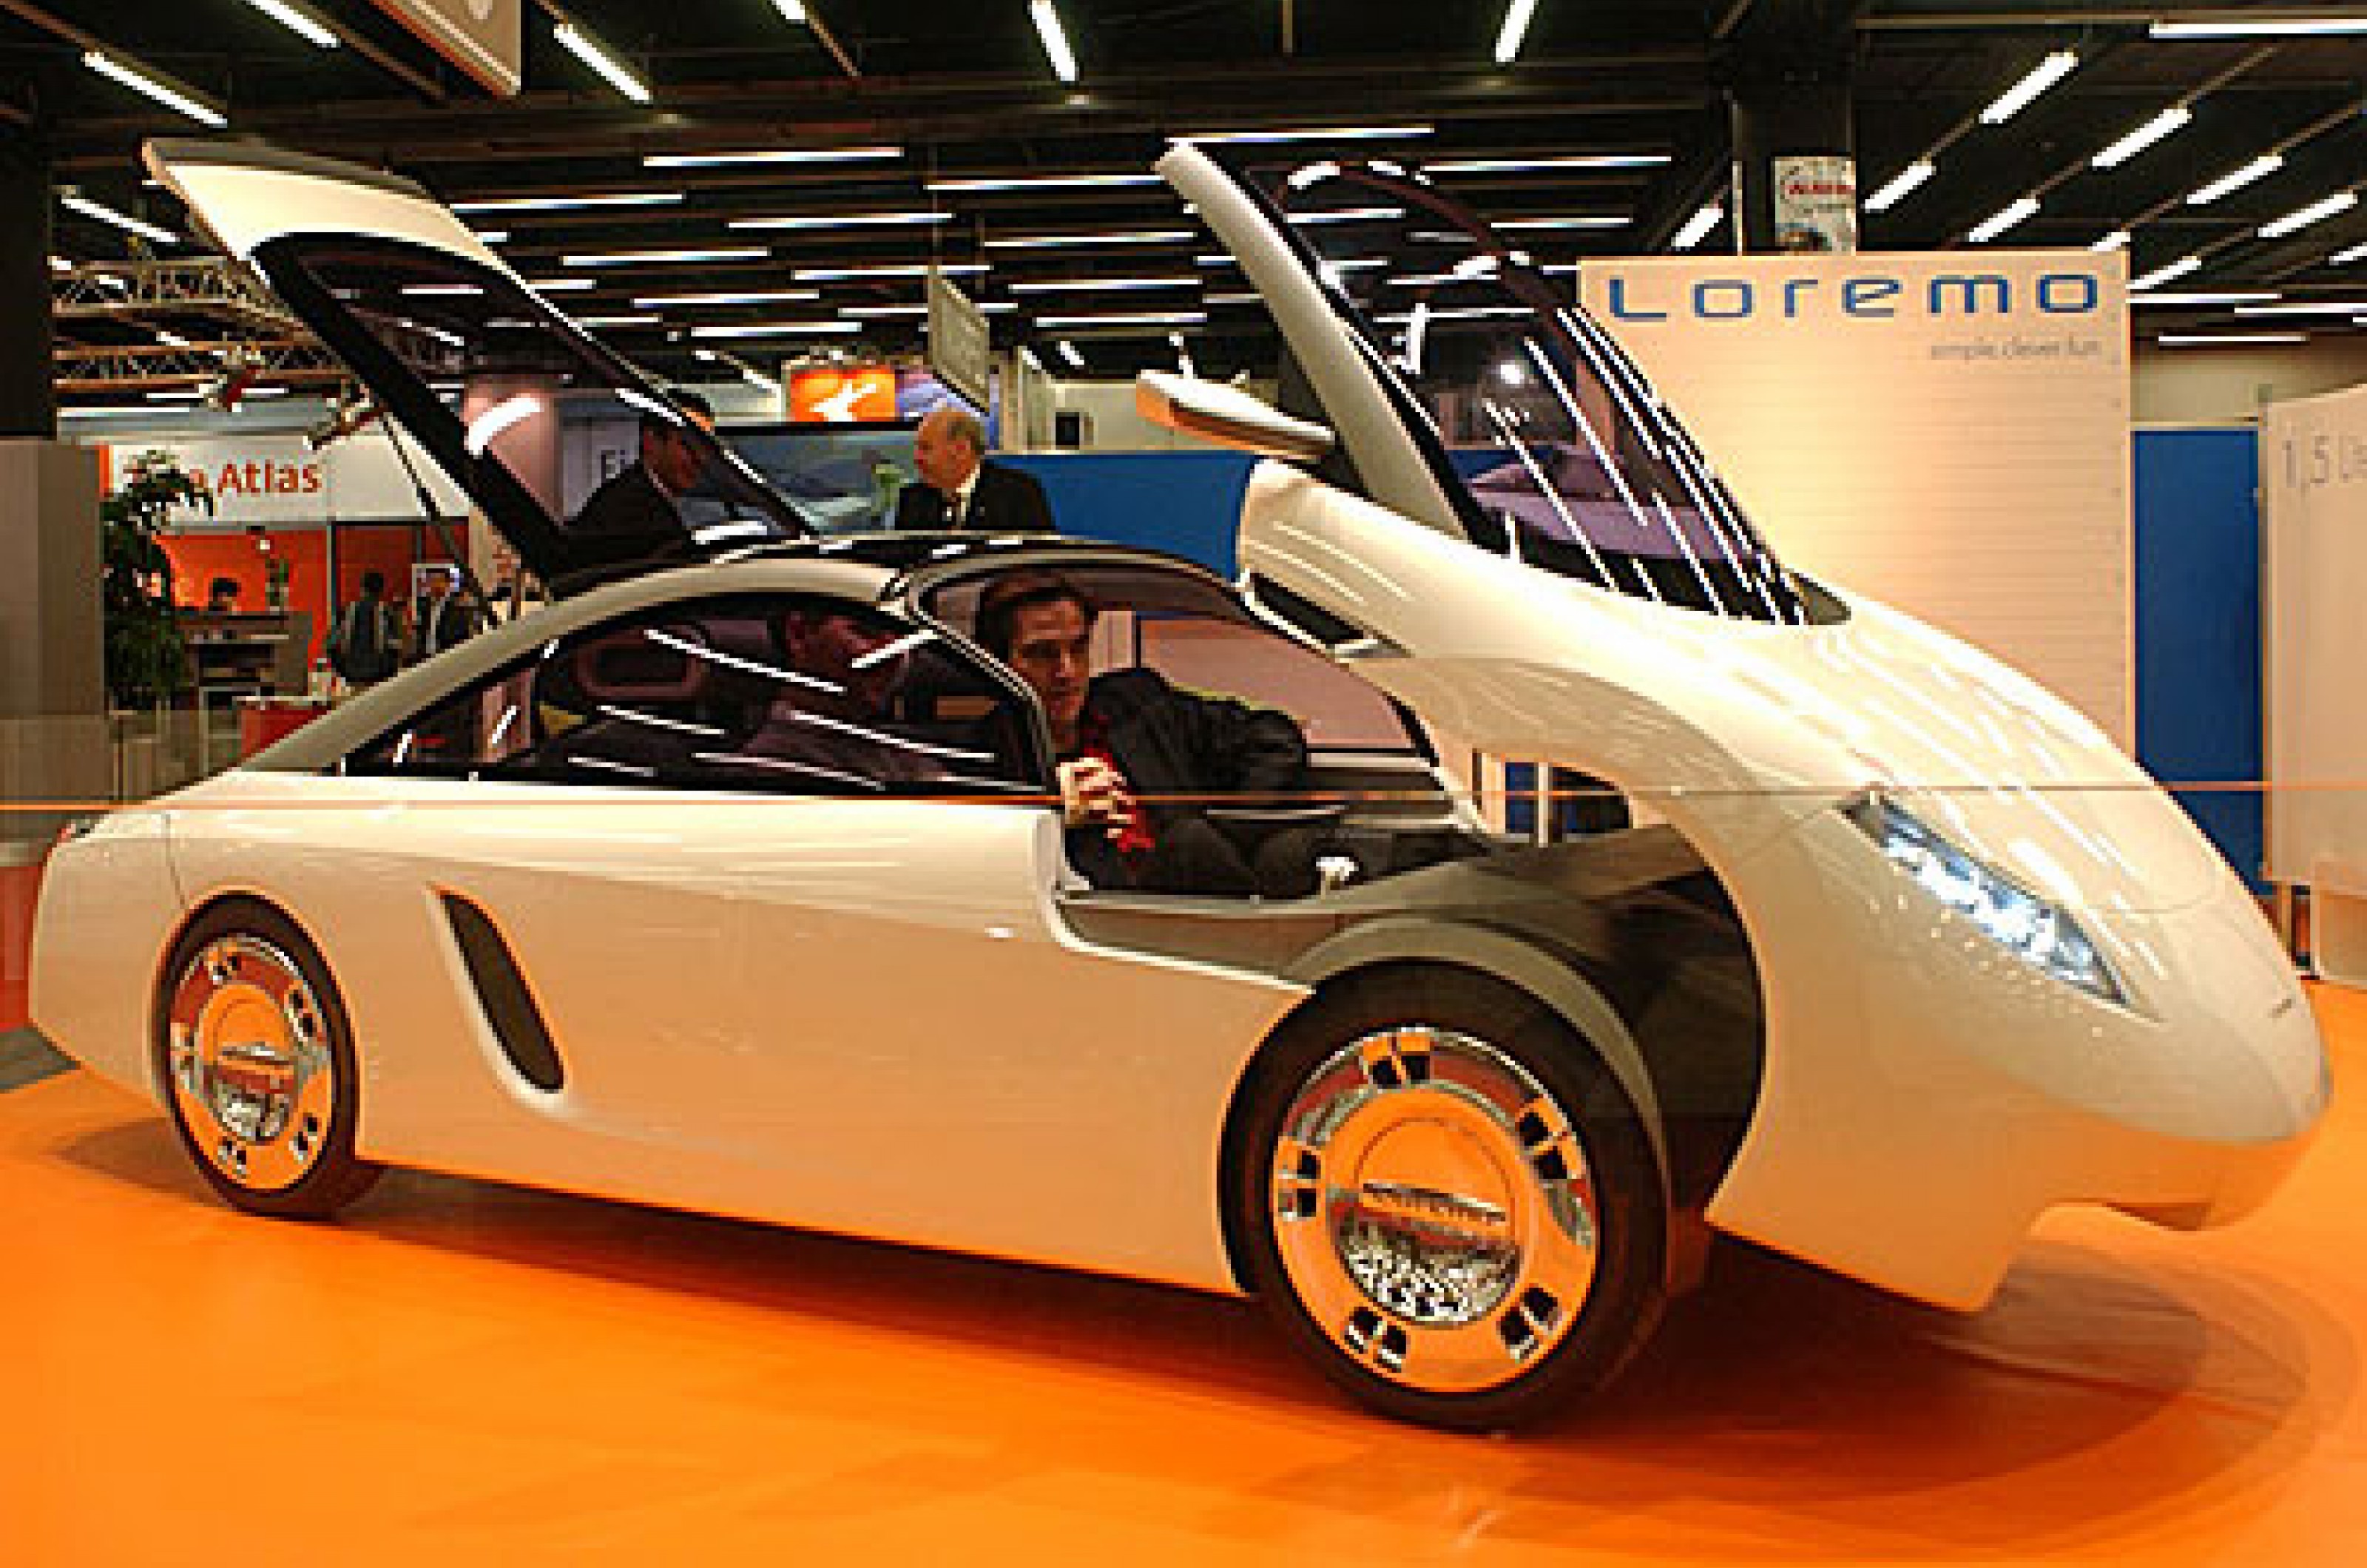 <p>Describing the entry point of the Loremo LS as a door feels like an insufficient term.</p>  <p>Its smooth lines were achieved with an intriguing absence of conventional doors. Instead, the front of the car’s bodywork, including the windshield, tips forward like a clamshell hood to reveal enough of an opening to clamber inside.</p>  <p>The concept likely stems from the company’s ethos ingrained in the name Loremo, which stands for Low Resistance Mobility.</p>  <p>Fewer seams for door panels marginally reduce drag and improve aerodynamics. And weight saving and streamline-design measures weren’t just for aesthetics – the company claimed the turbodiesel engine would deliver 157mpg.</p>  <p>Even more bizarrely, this LS is a 2+2 with rearward-facing back seats which are accessible via a trunk-like opening.</p>